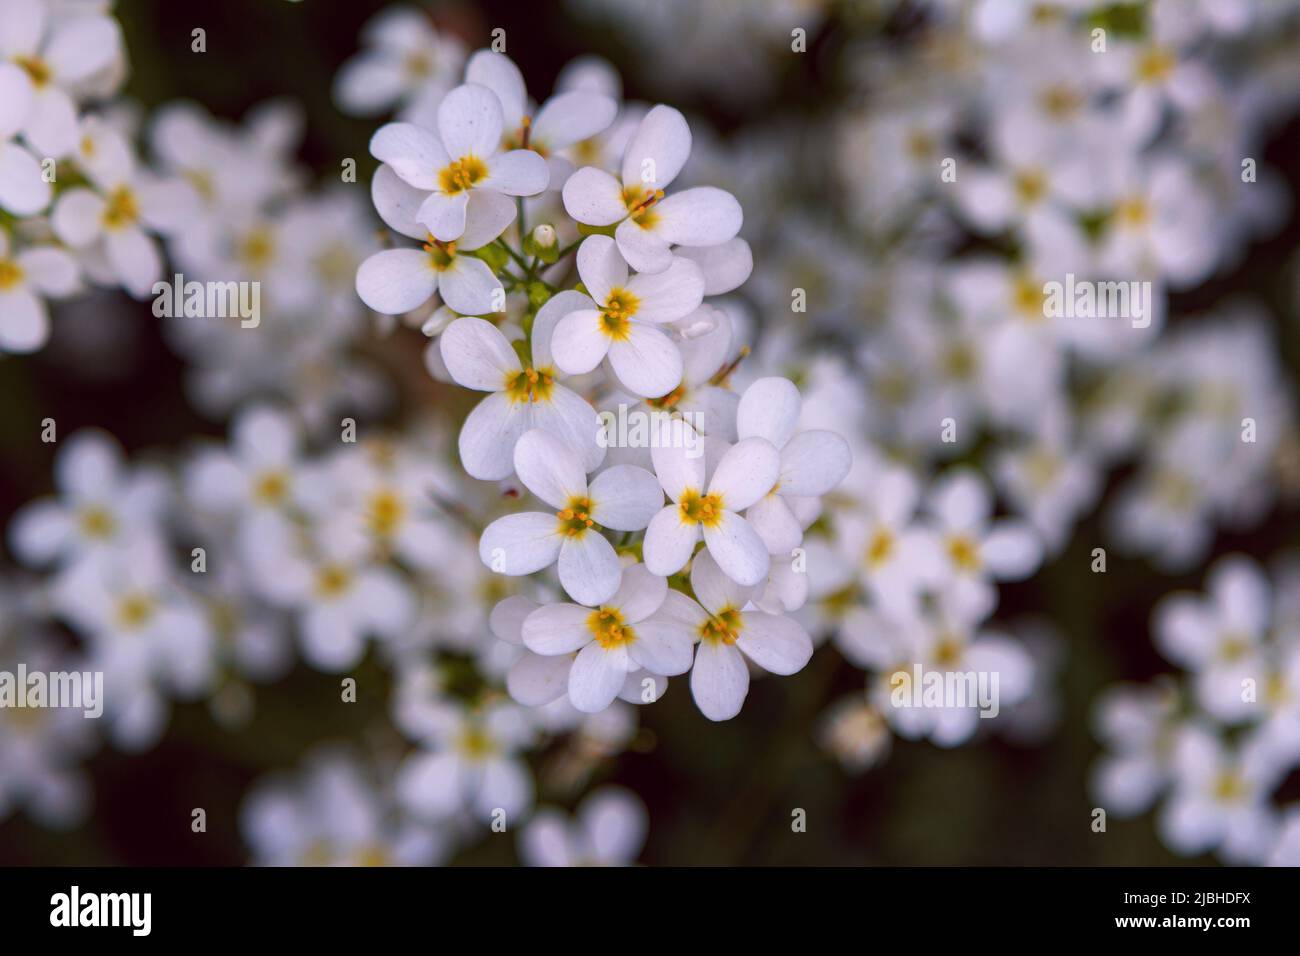 Close up beautiful blooming Arabis caucasica, garden arabis or mountain rock cress white flowers, growing on the meadow Stock Photo